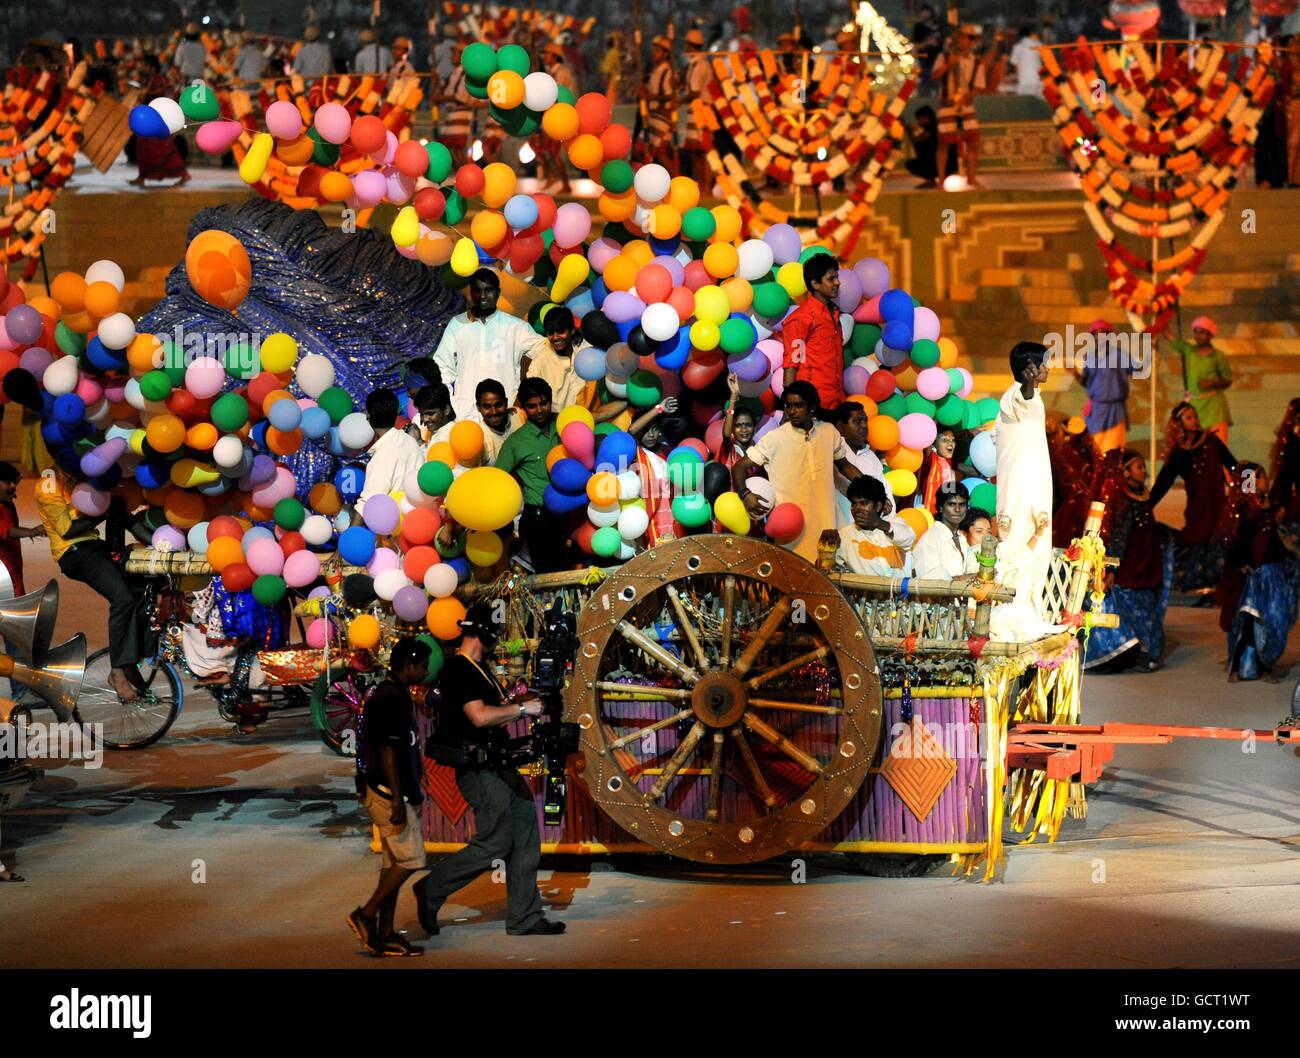 Performers on a float during the Opening Ceremony at the Jawaharlal Nehru Stadium in New Delhi, India. Stock Photo